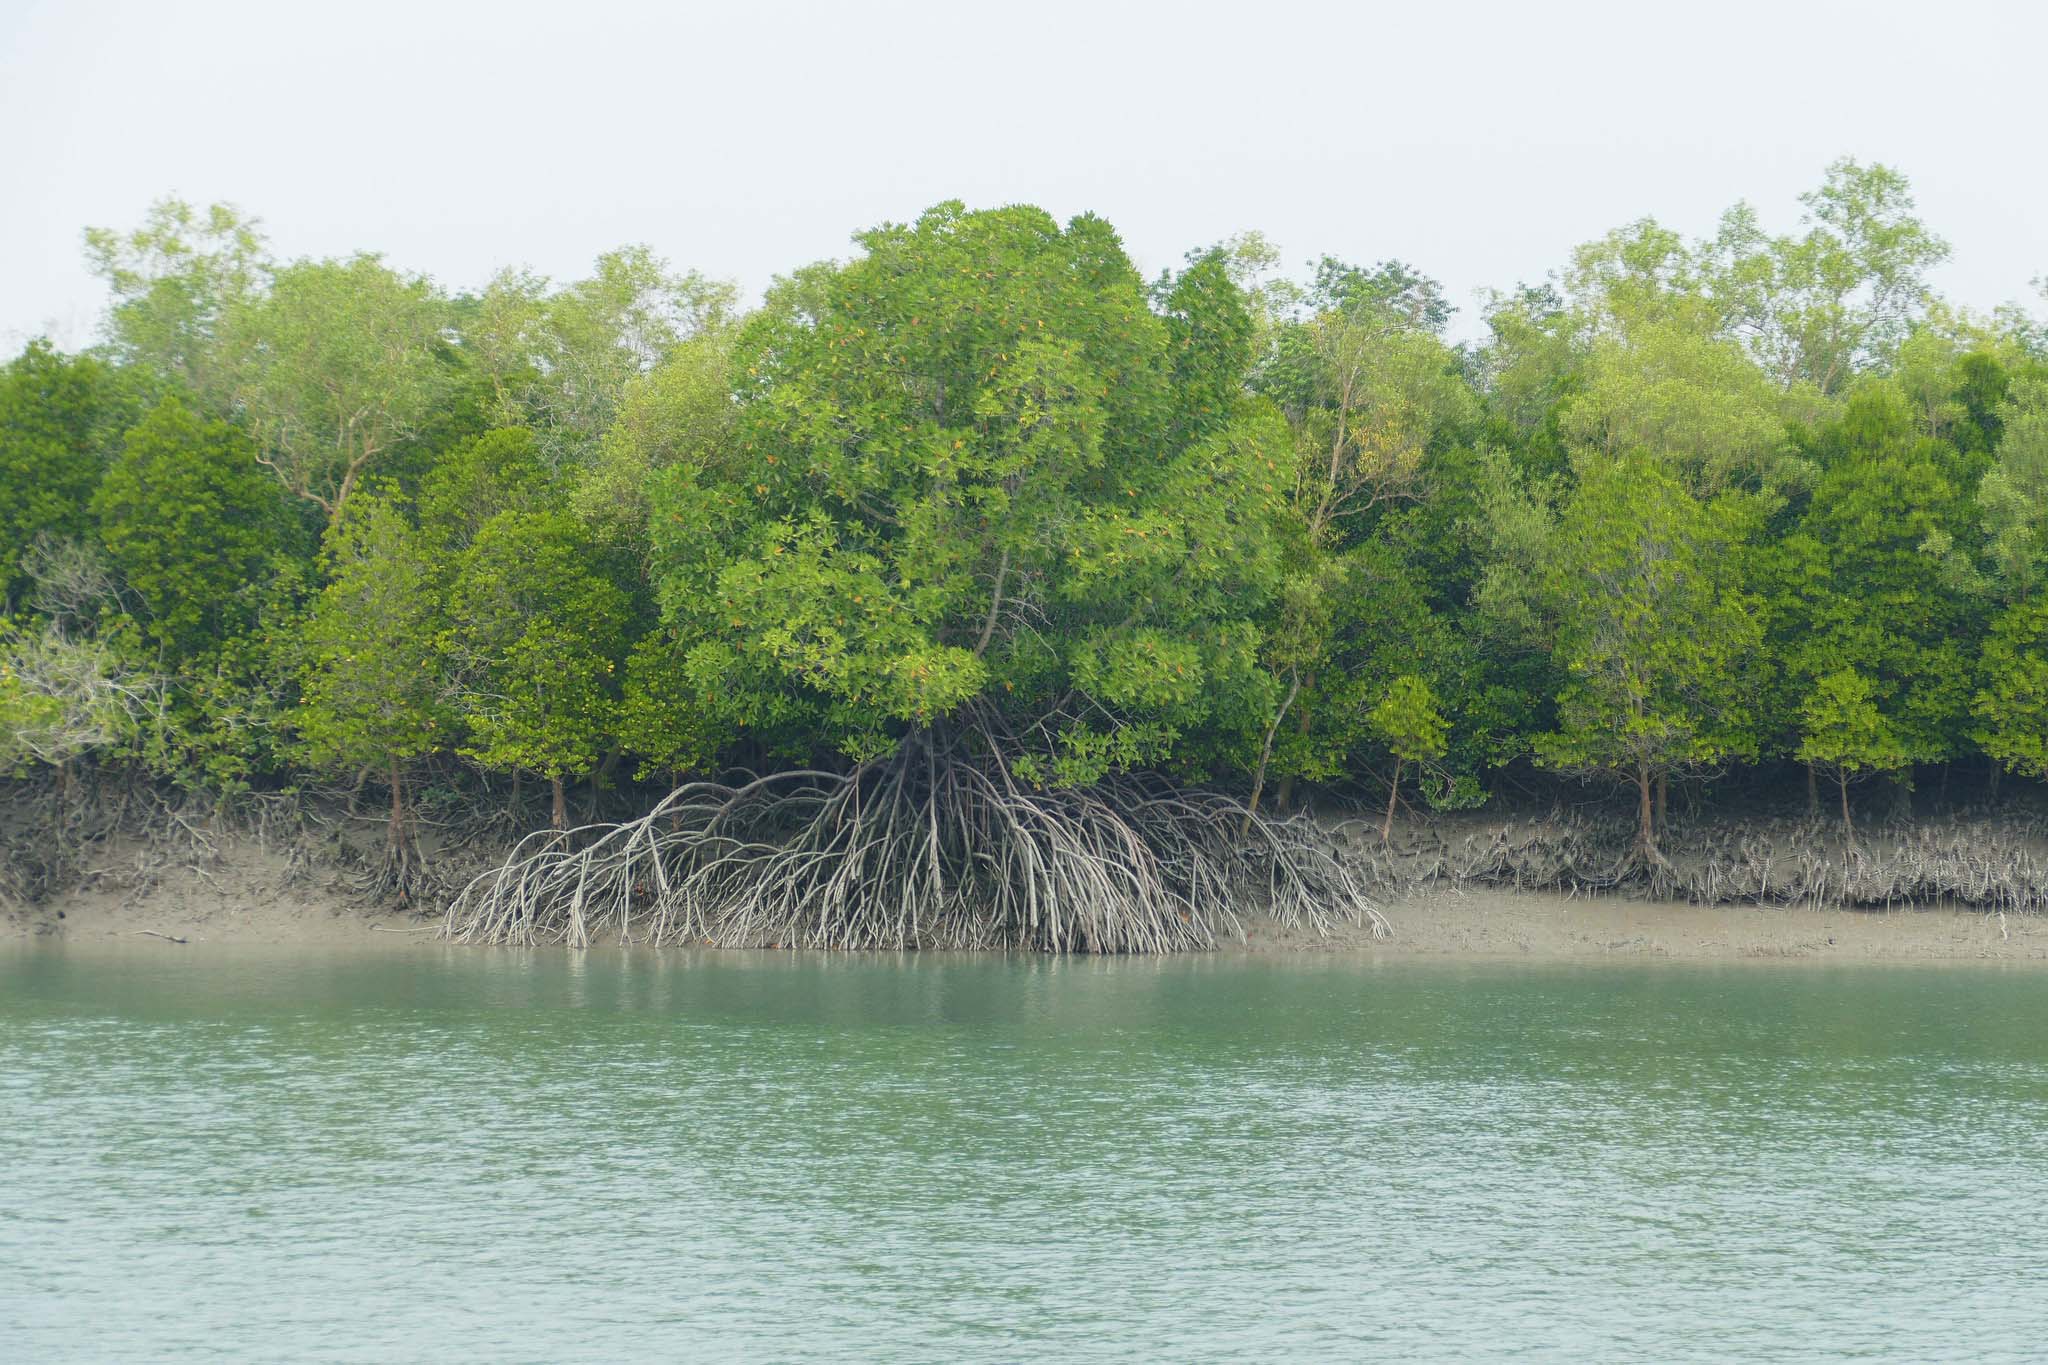 A view from the water of a coast covered in mangrove trees, with their long, dense roots visible